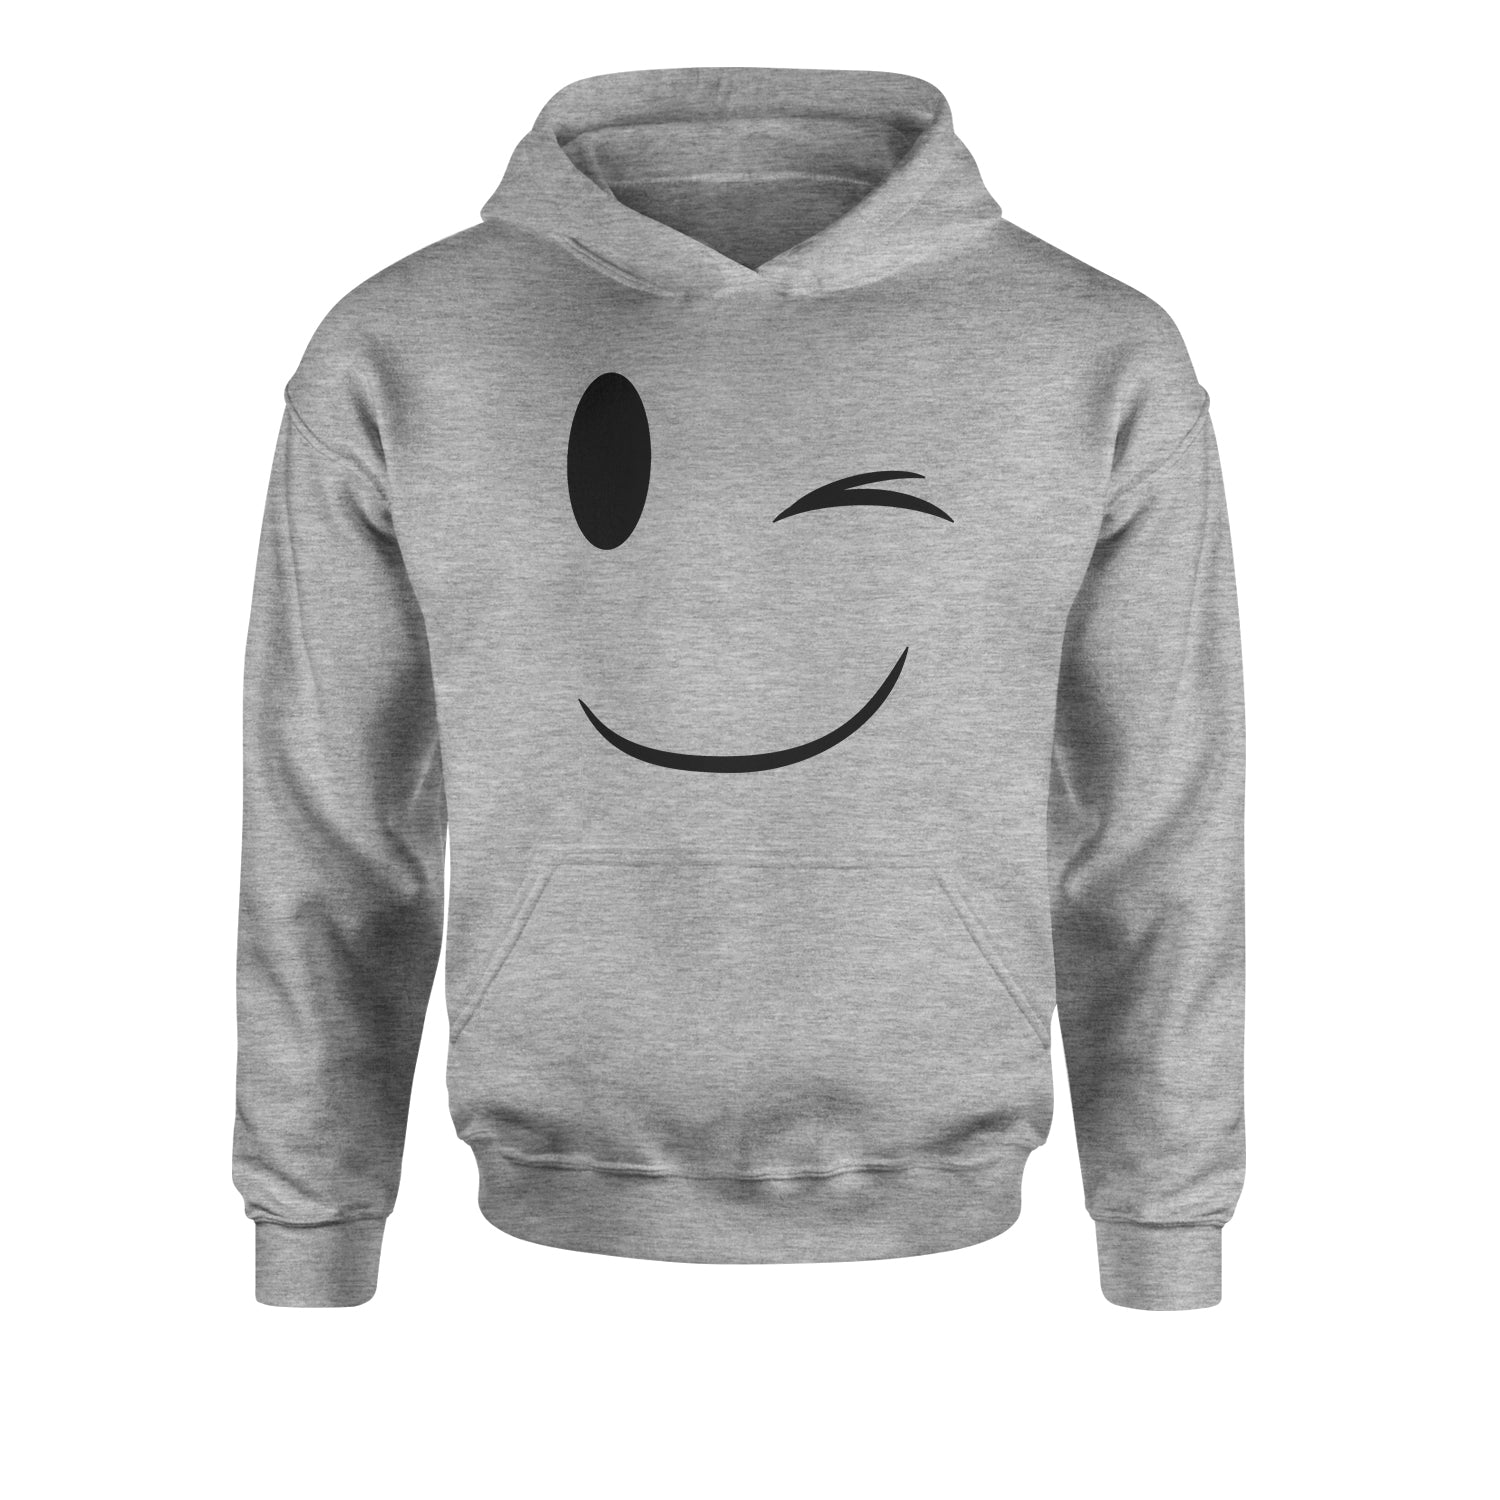 Emoticon Winking Smile Face Youth-Sized Hoodie cosplay, costume, dress, emoji, emote, face, halloween, smiley, up, yellow, youth-sized by Expression Tees